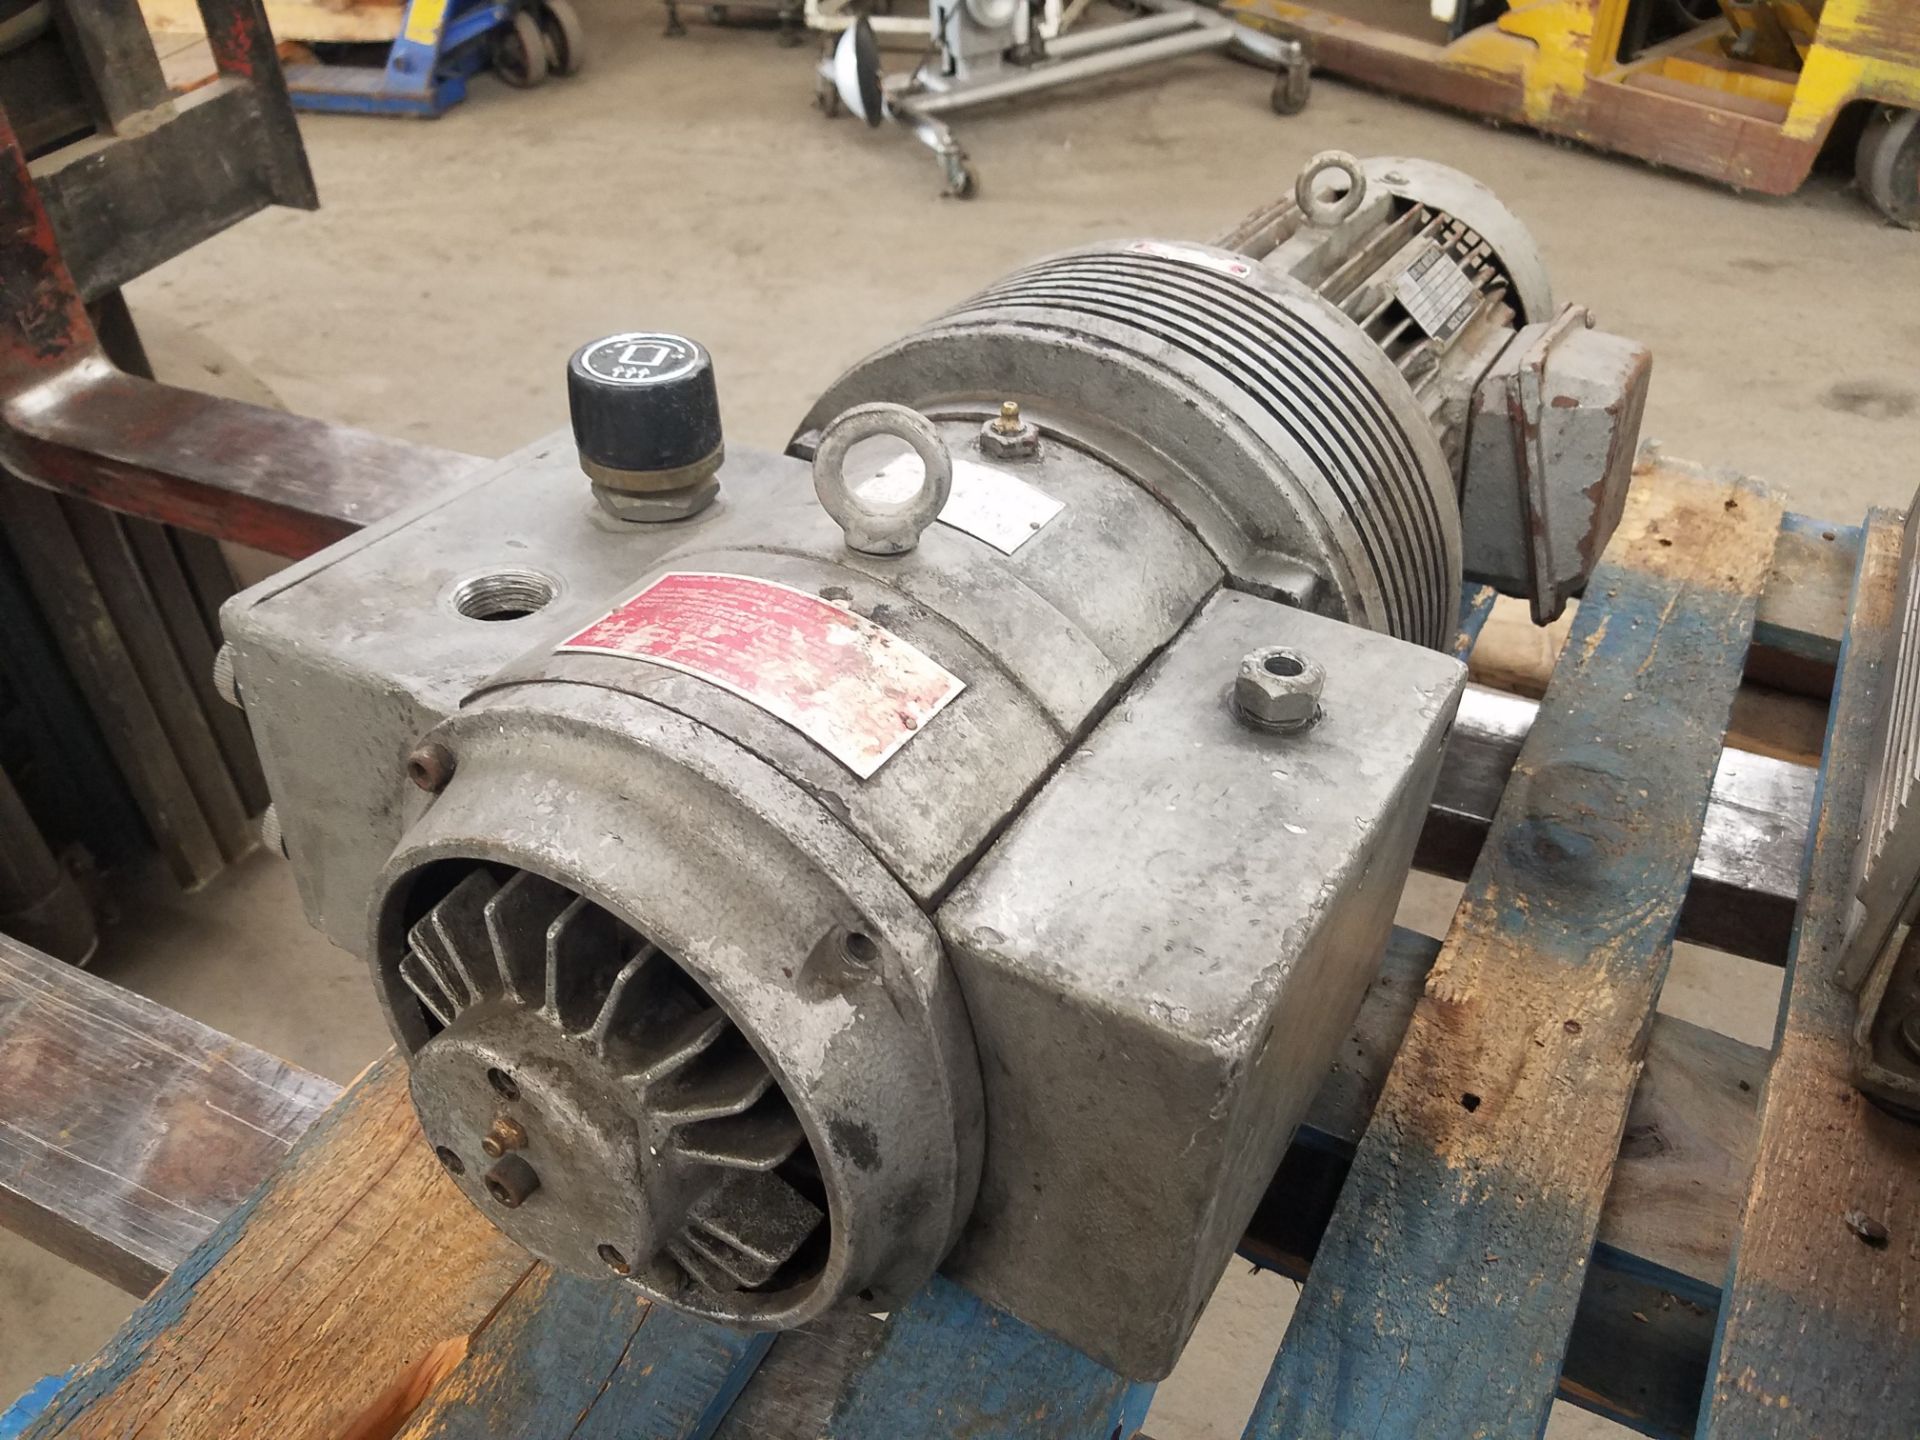 Rietschie VFT Vacuum Pump,2.2 hp, S/N P00131, Volt 220, 3 Phase (Loading Fee $100) - Image 2 of 4